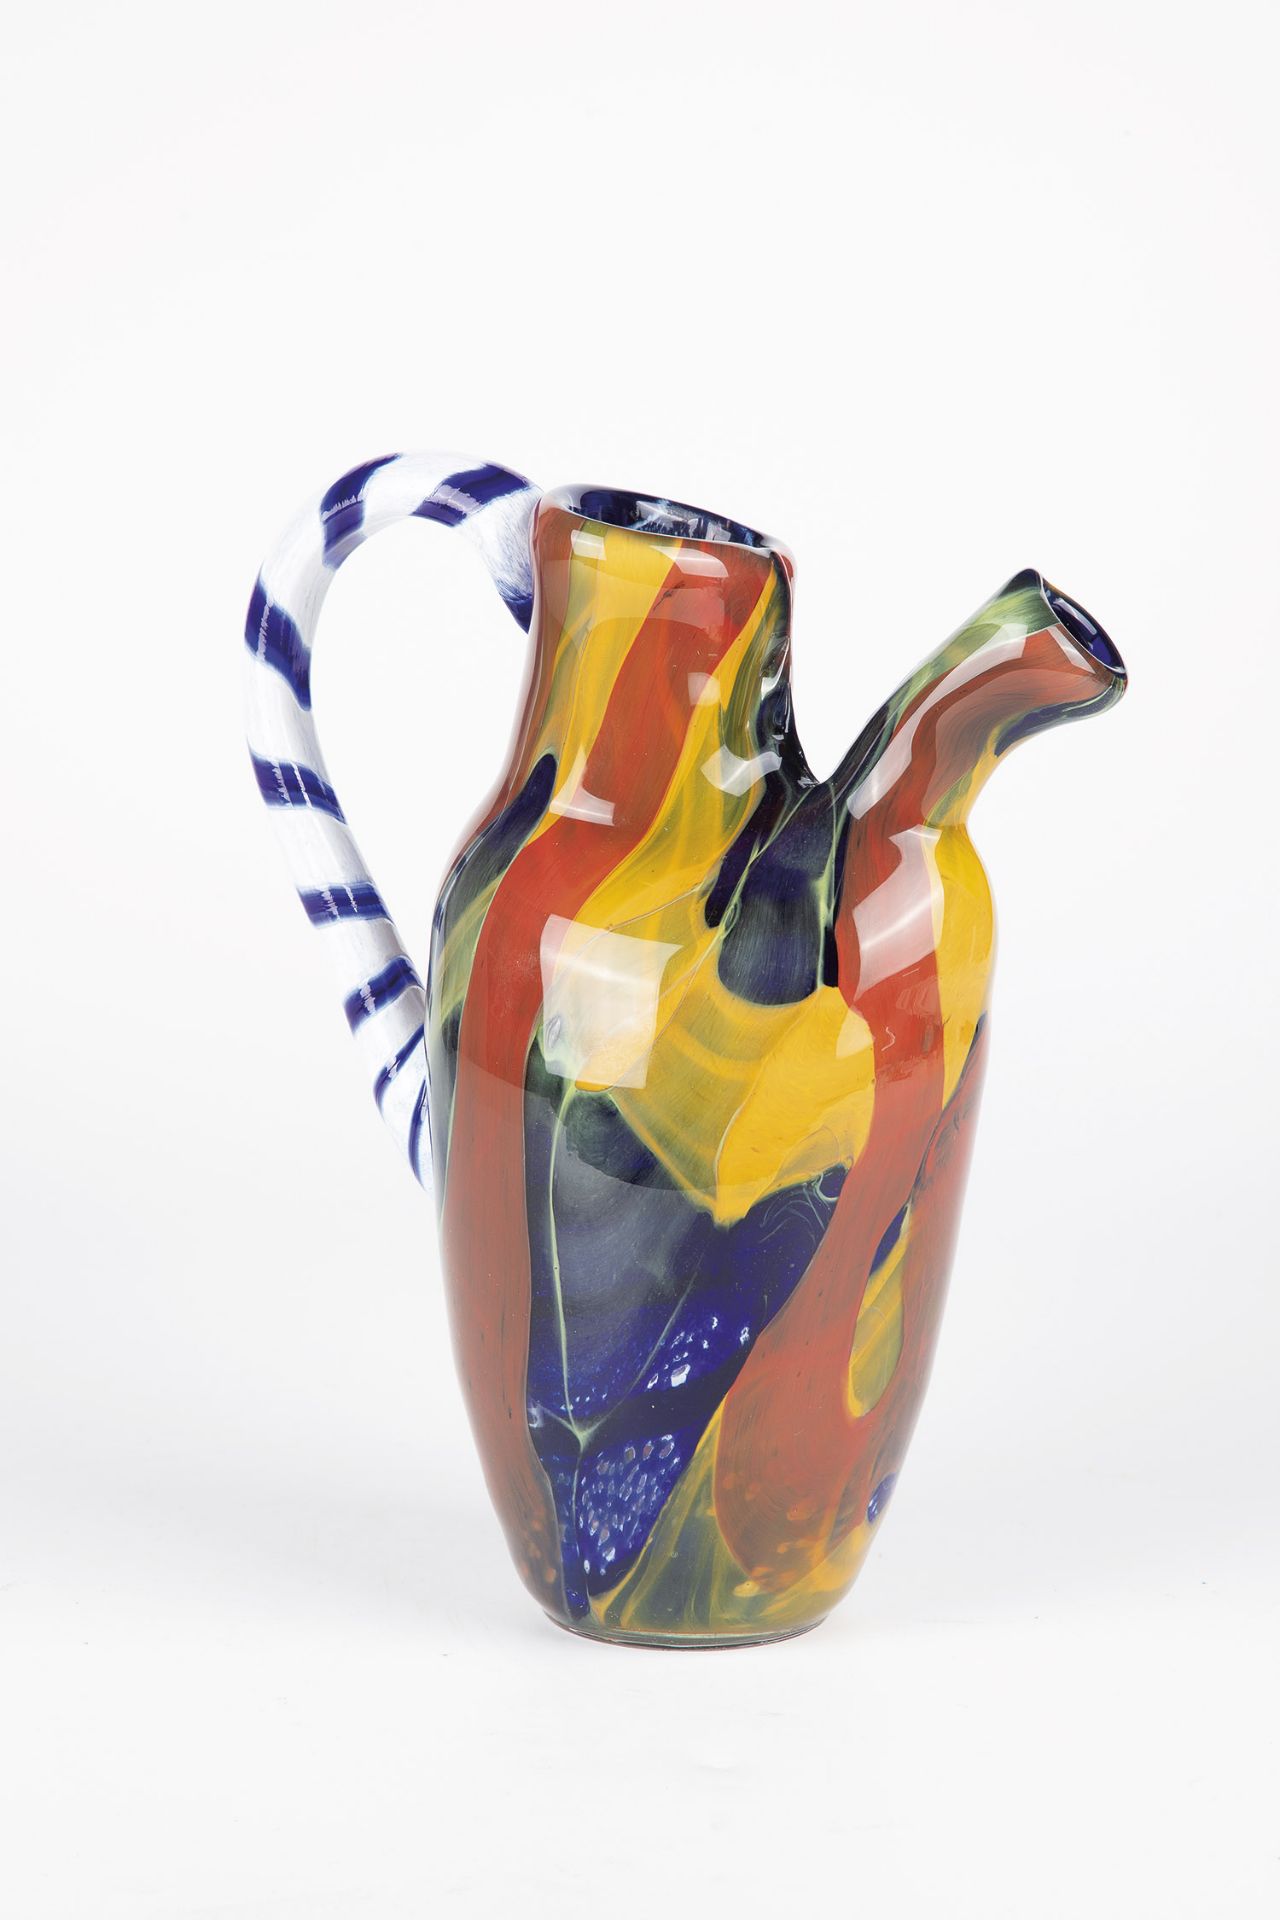 Krug Mihail Topescu (1956) Colourless glass with multi-coloured underlay, freely formed. Appliqued